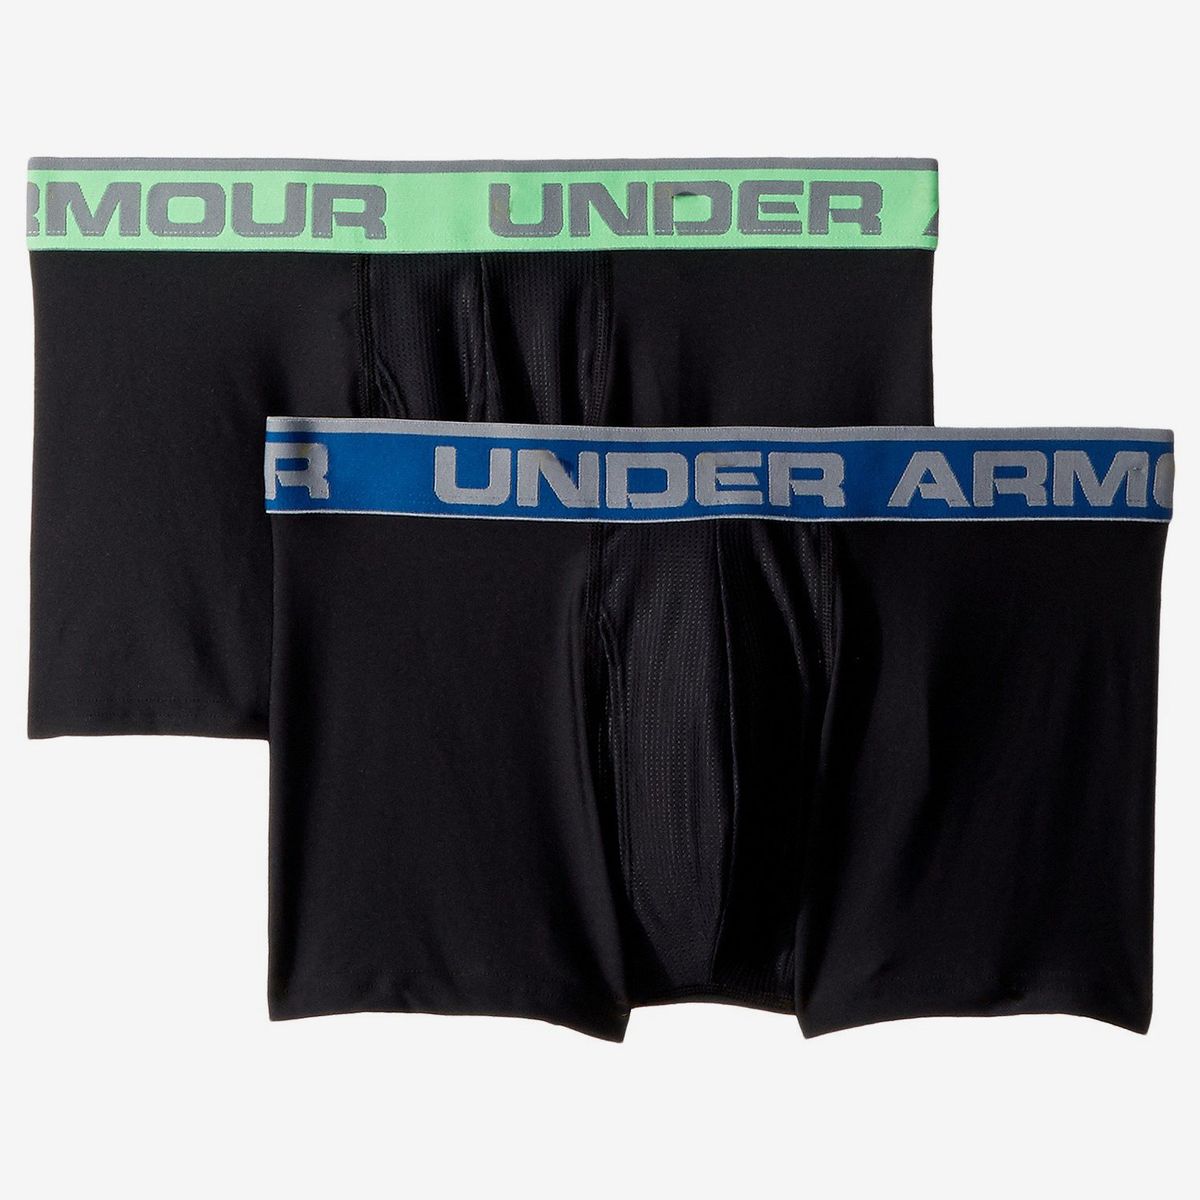 2X-Large Mens Boxer Briefs Offering Complete Comfort Fast-Drying Mens Underwear 15 cm Royal//Academy 400 Under Armour 2 Pack Tech Sports Underwear